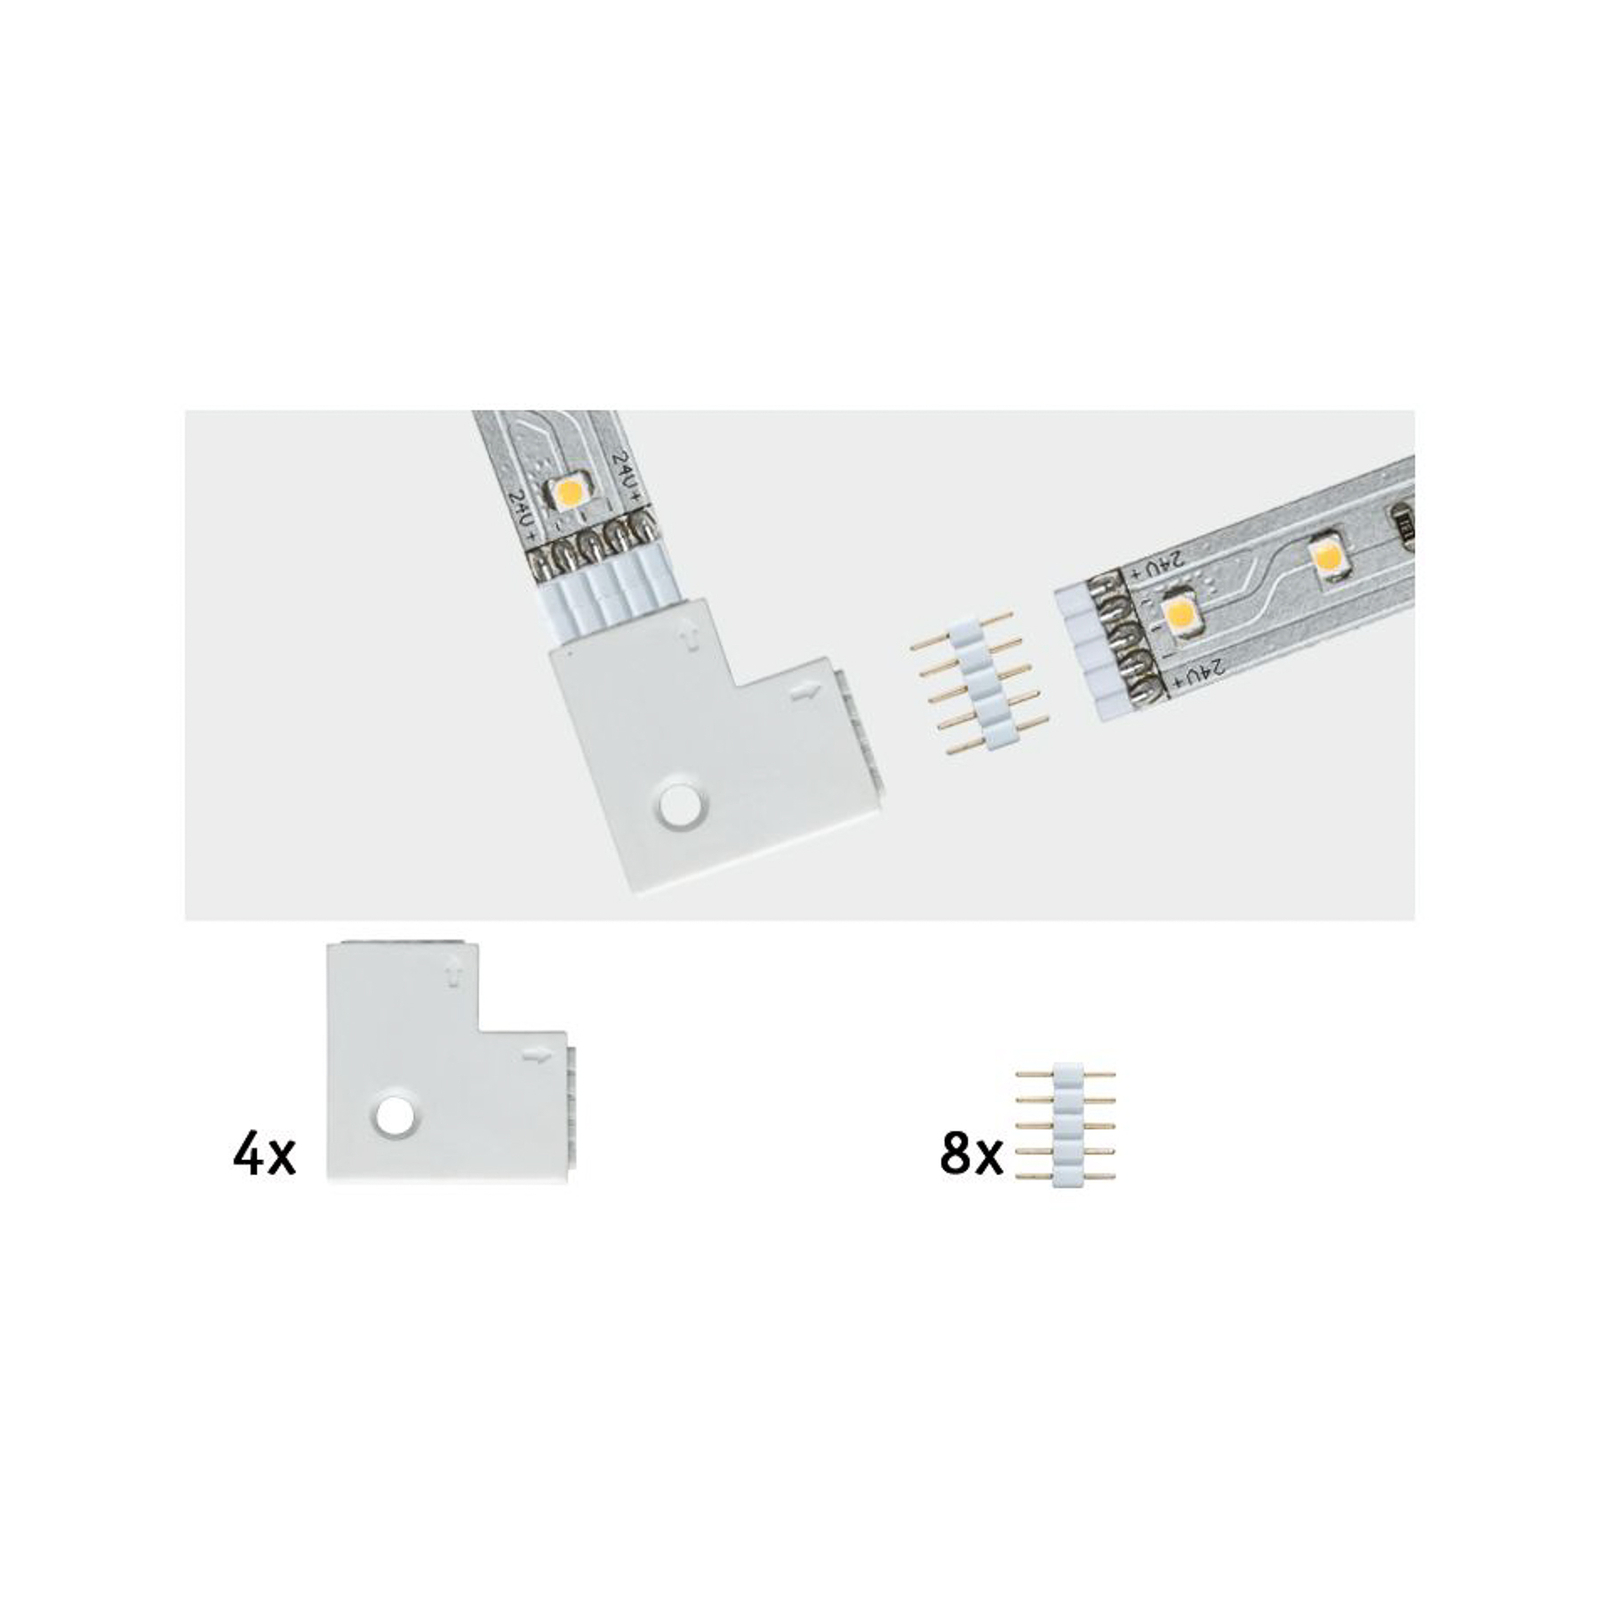 90 degree corner connector for Max LED strip